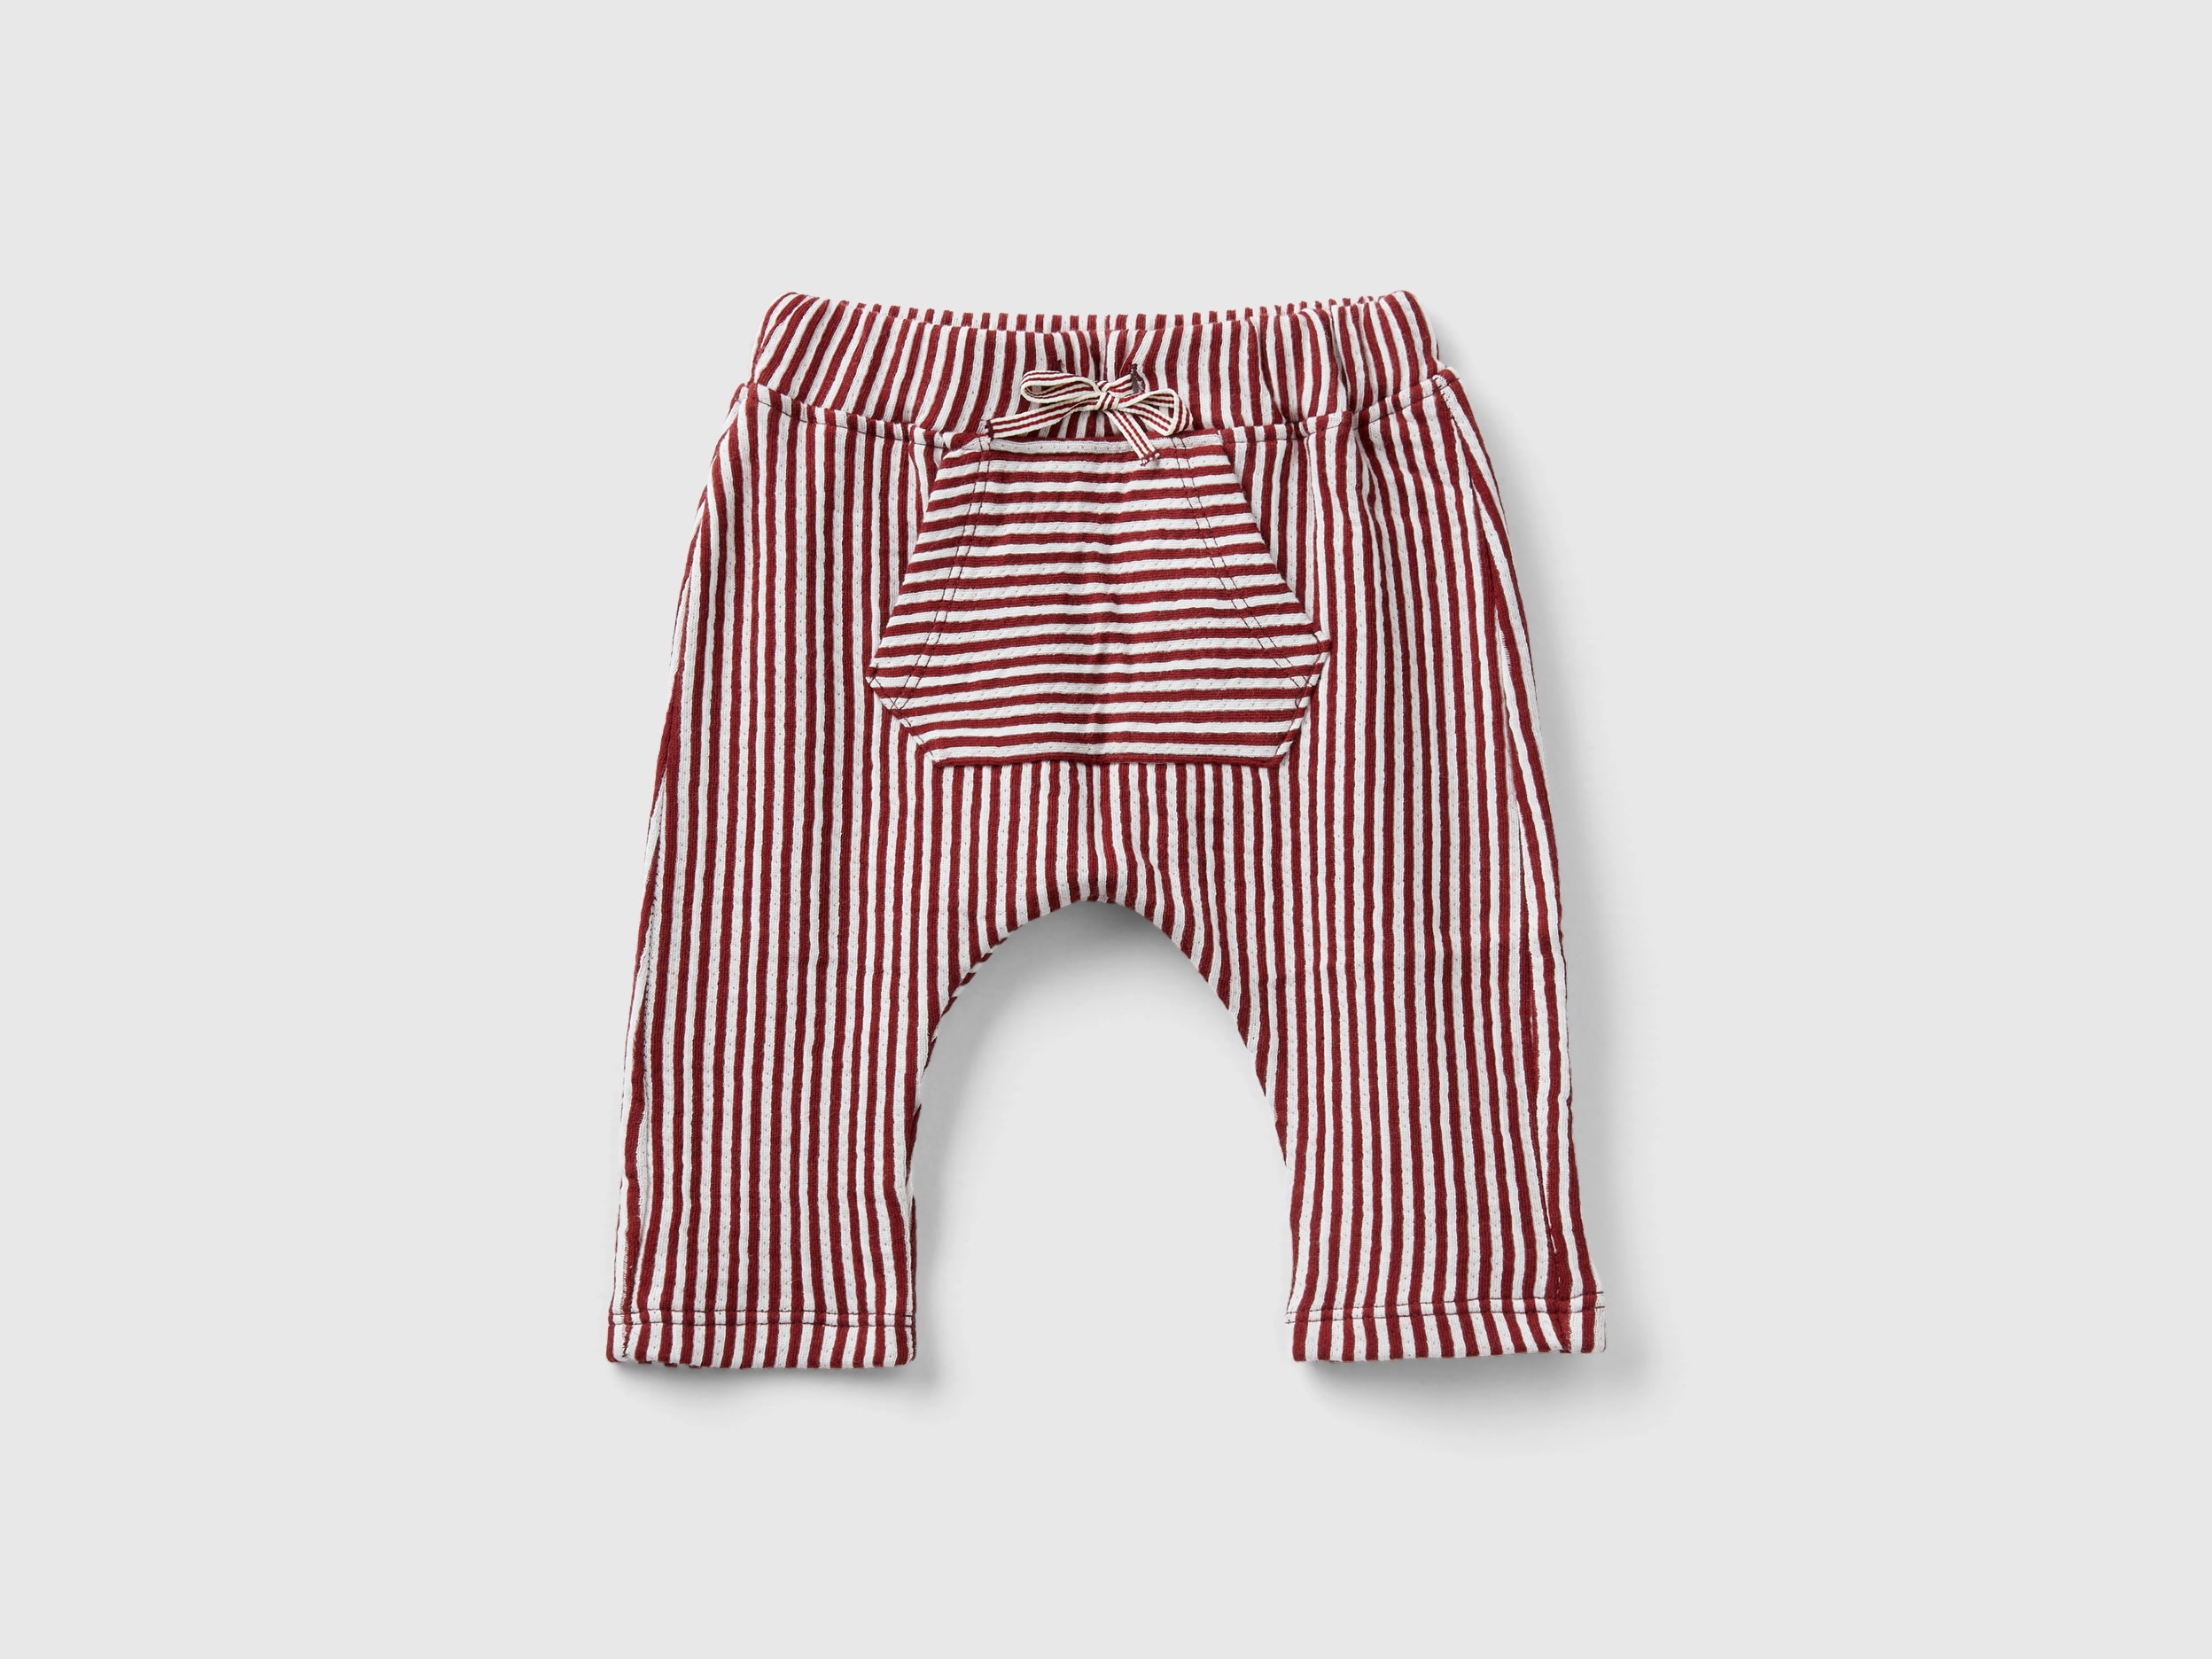 Benetton, Striped Trousers With Pocket, Size 3-6, Burgundy, Kids